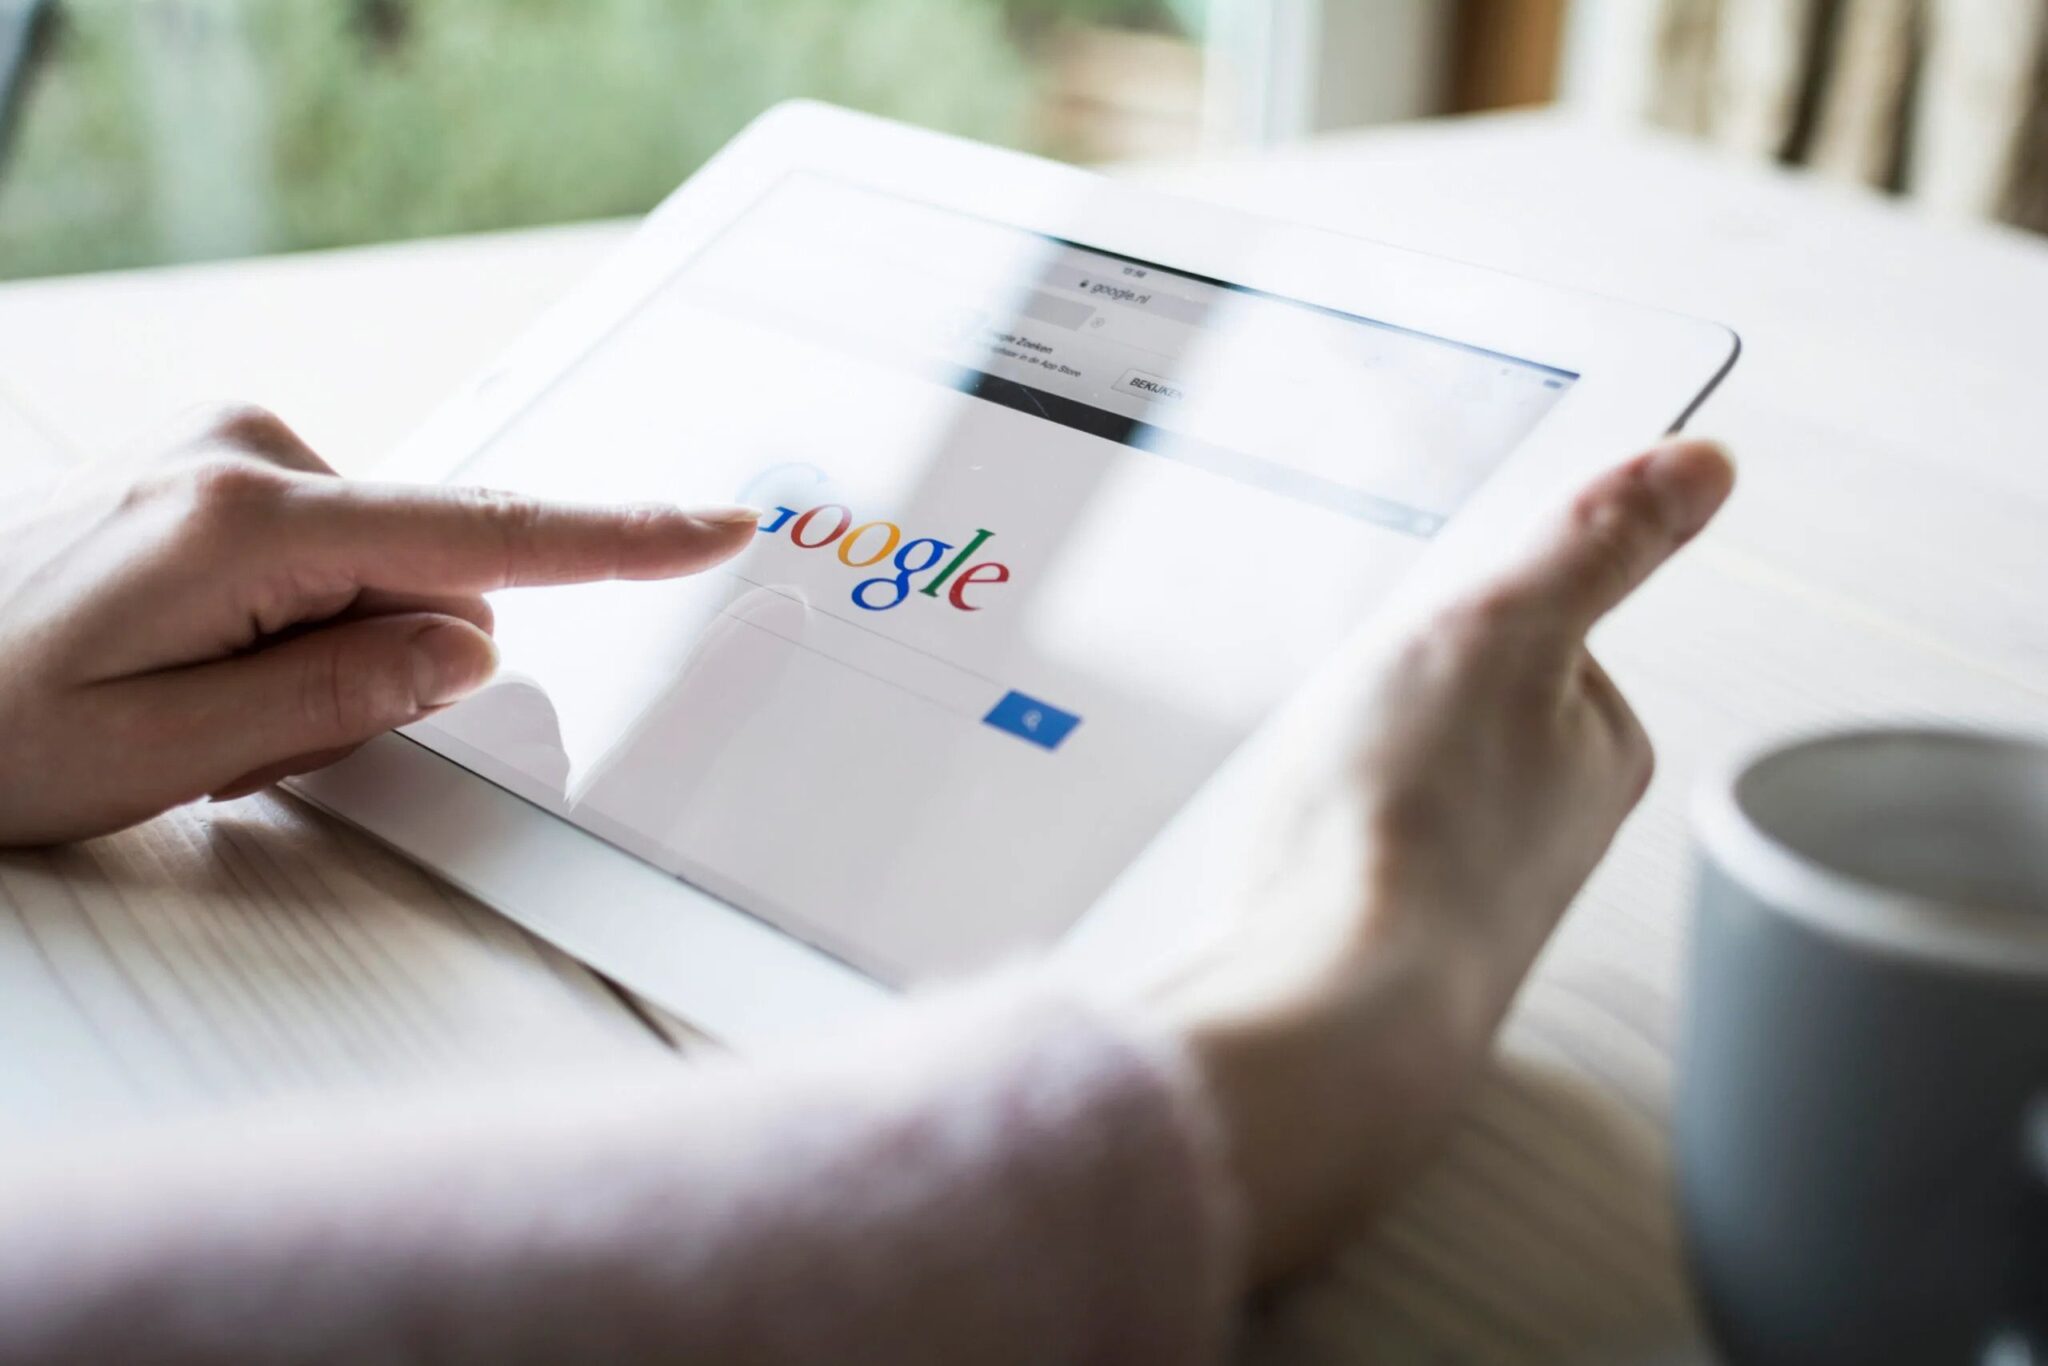 SEO services, improve your Google ranking with our expert Search Engine Optimisation plans